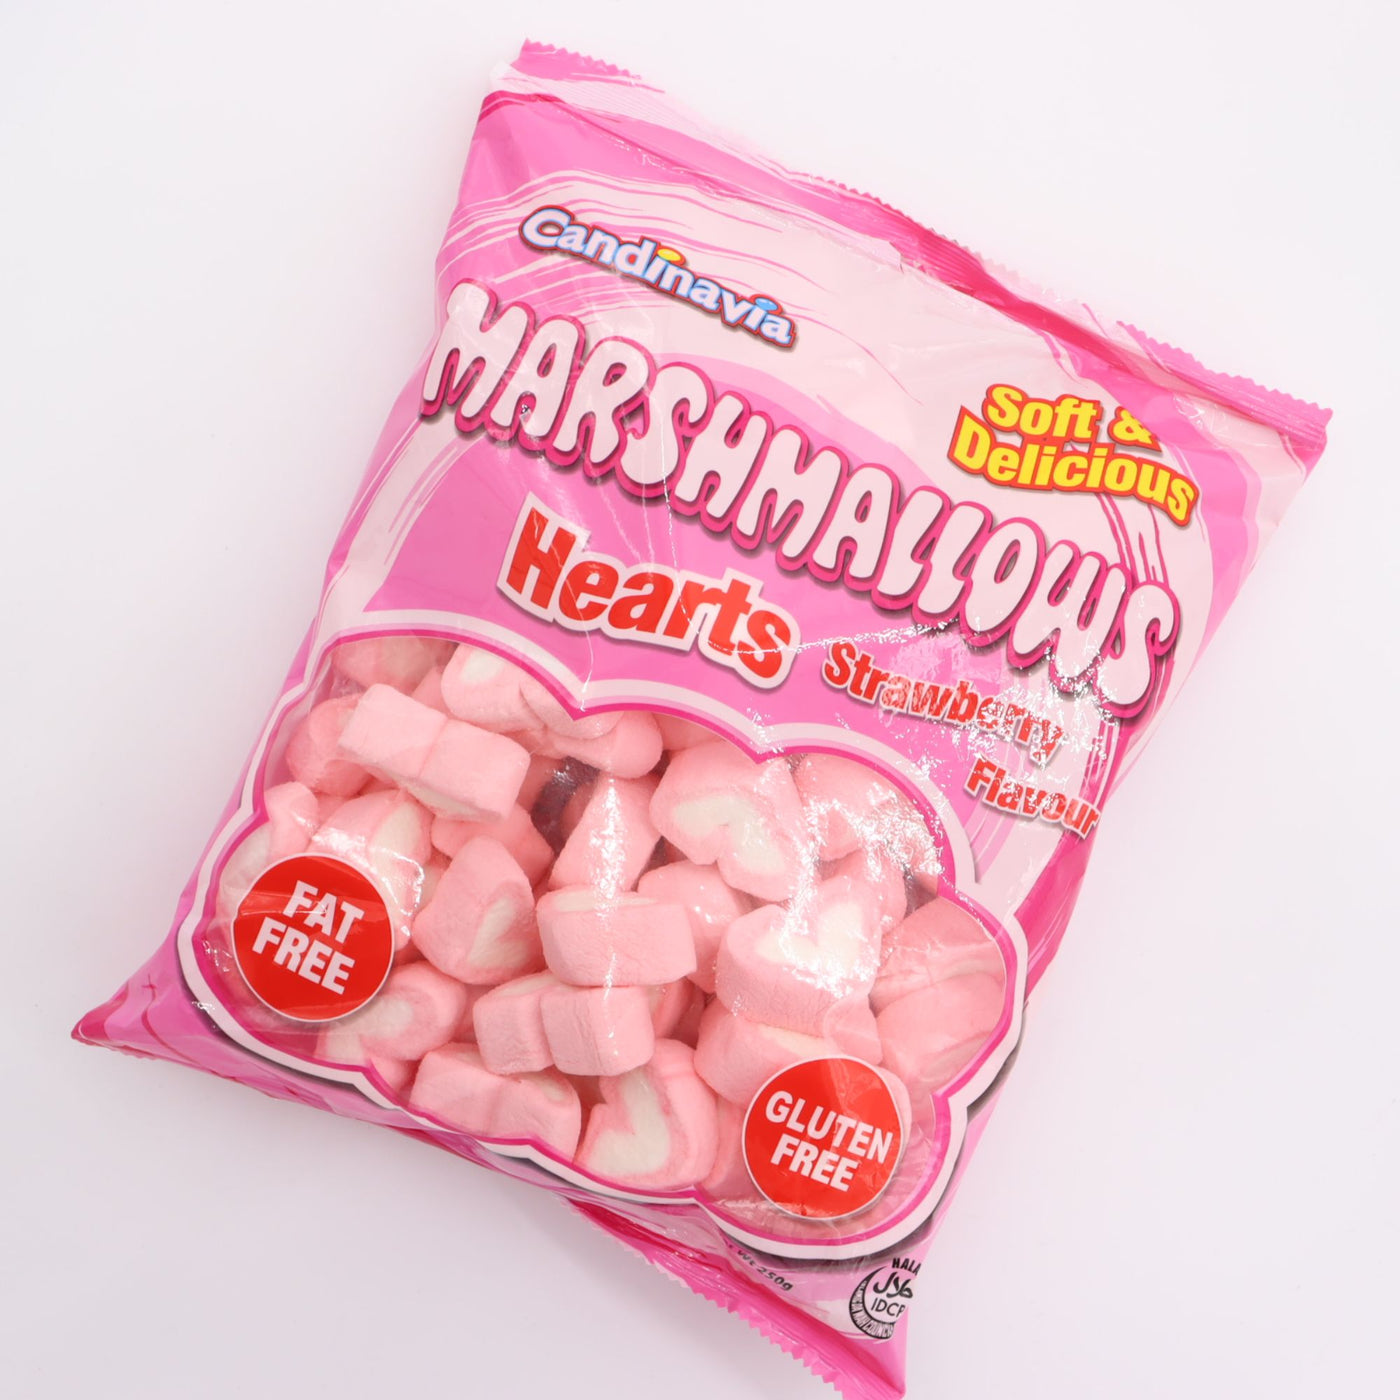 Marshmallows Hearts Strawberry Flavour